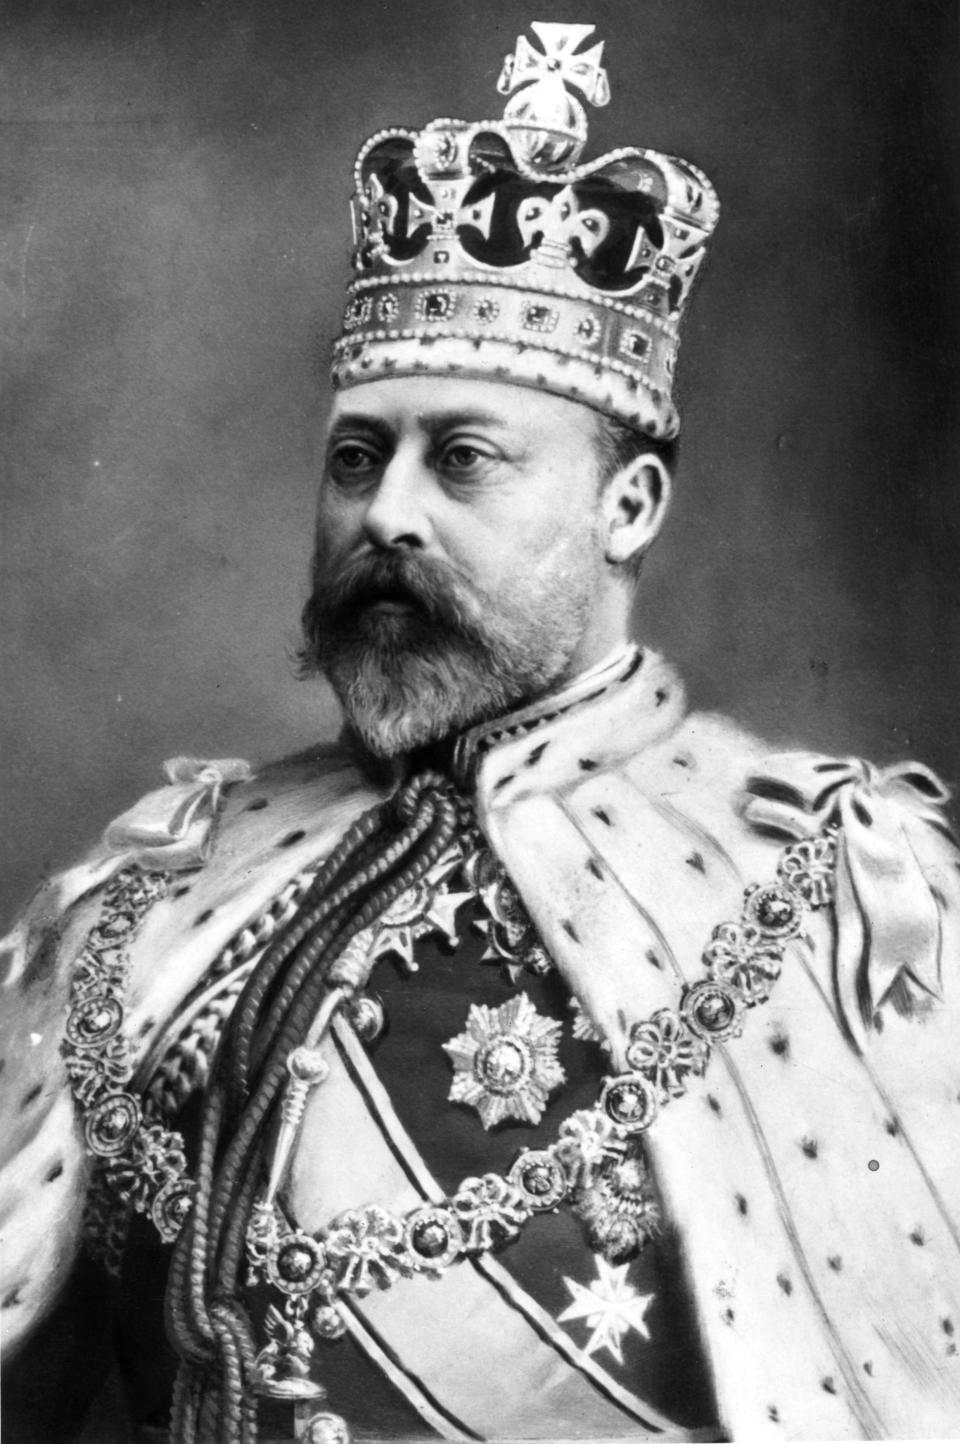 King Edward VII in his Coronation robes, 1902